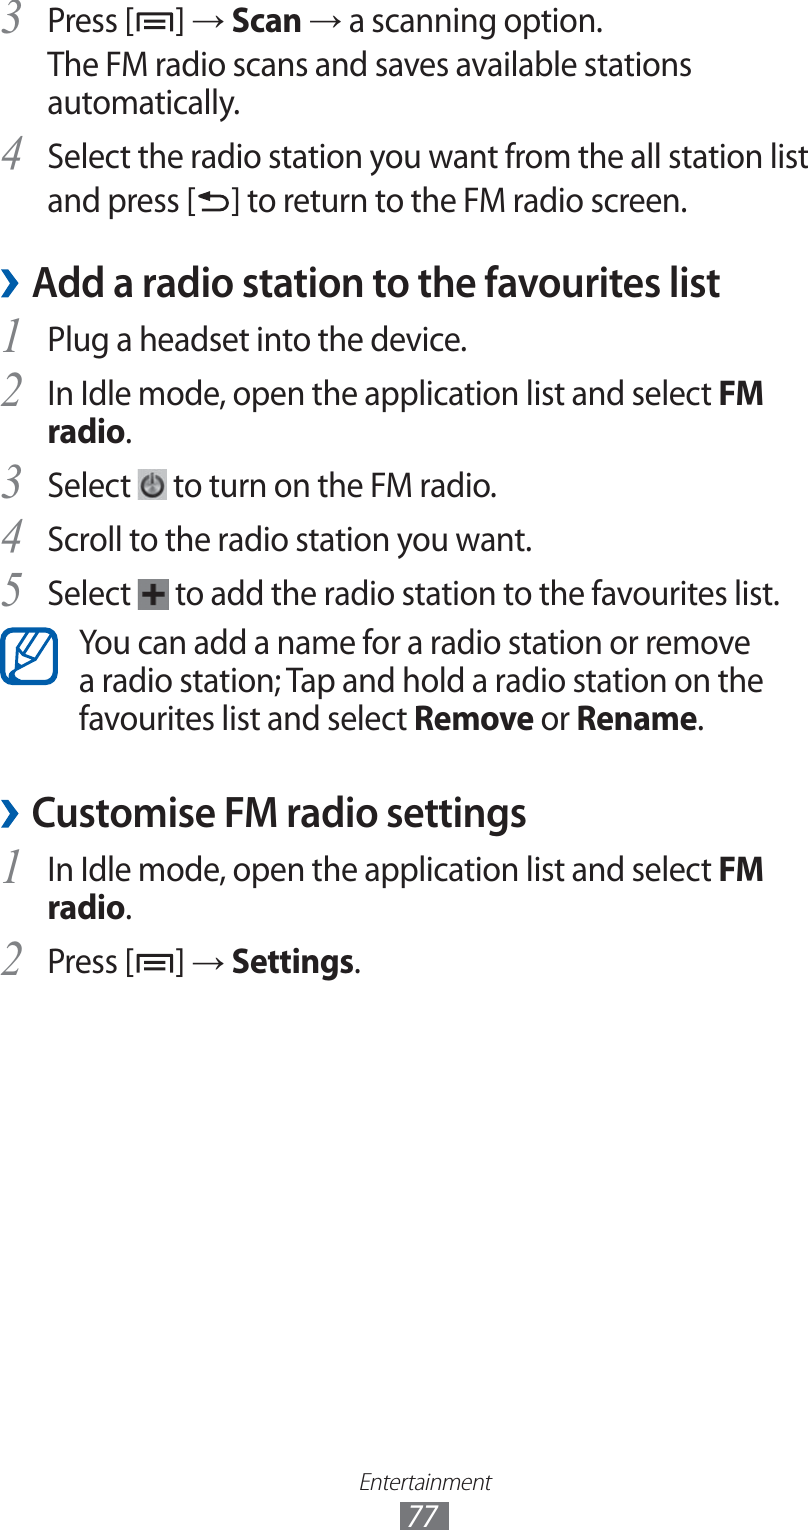 Entertainment77Press [3 ] → Scan → a scanning option.The FM radio scans and saves available stations automatically.Select the radio station you want from the all station list4 and press [ ] to return to the FM radio screen.Add a radio station to the favourites list ›Plug a headset into the device.1 In Idle mode, open the application list and select 2 FM radio.Select 3  to turn on the FM radio.Scroll to the radio station you want.4 Select 5  to add the radio station to the favourites list.You can add a name for a radio station or remove a radio station; Tap and hold a radio station on the favourites list and select Remove or Rename.Customise FM radio settings ›In Idle mode, open the application list and select 1 FM radio.Press [2 ] → Settings.